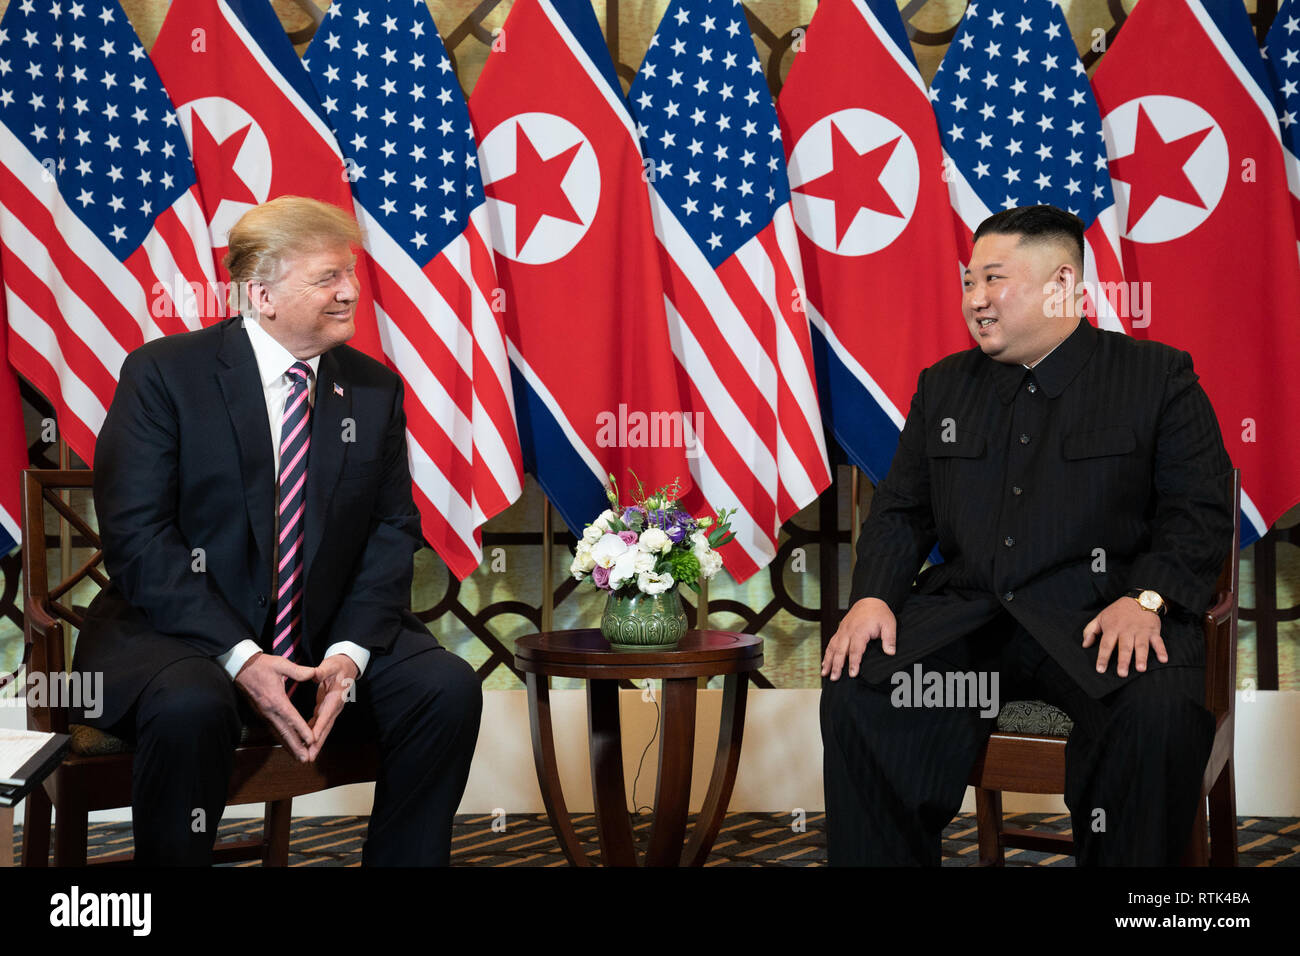 President Donald J. Trump and Kim Jong Un, Chairman of the State Affairs Commission of the Democratic PeopleÕs Republic of Korea, talk Wednesday, Feb. 27, 2019, at the Sofitel Legend Metropole hotel in Hanoi, for their second summit.   People:  President Donald Trump, Kim Jong Un Stock Photo